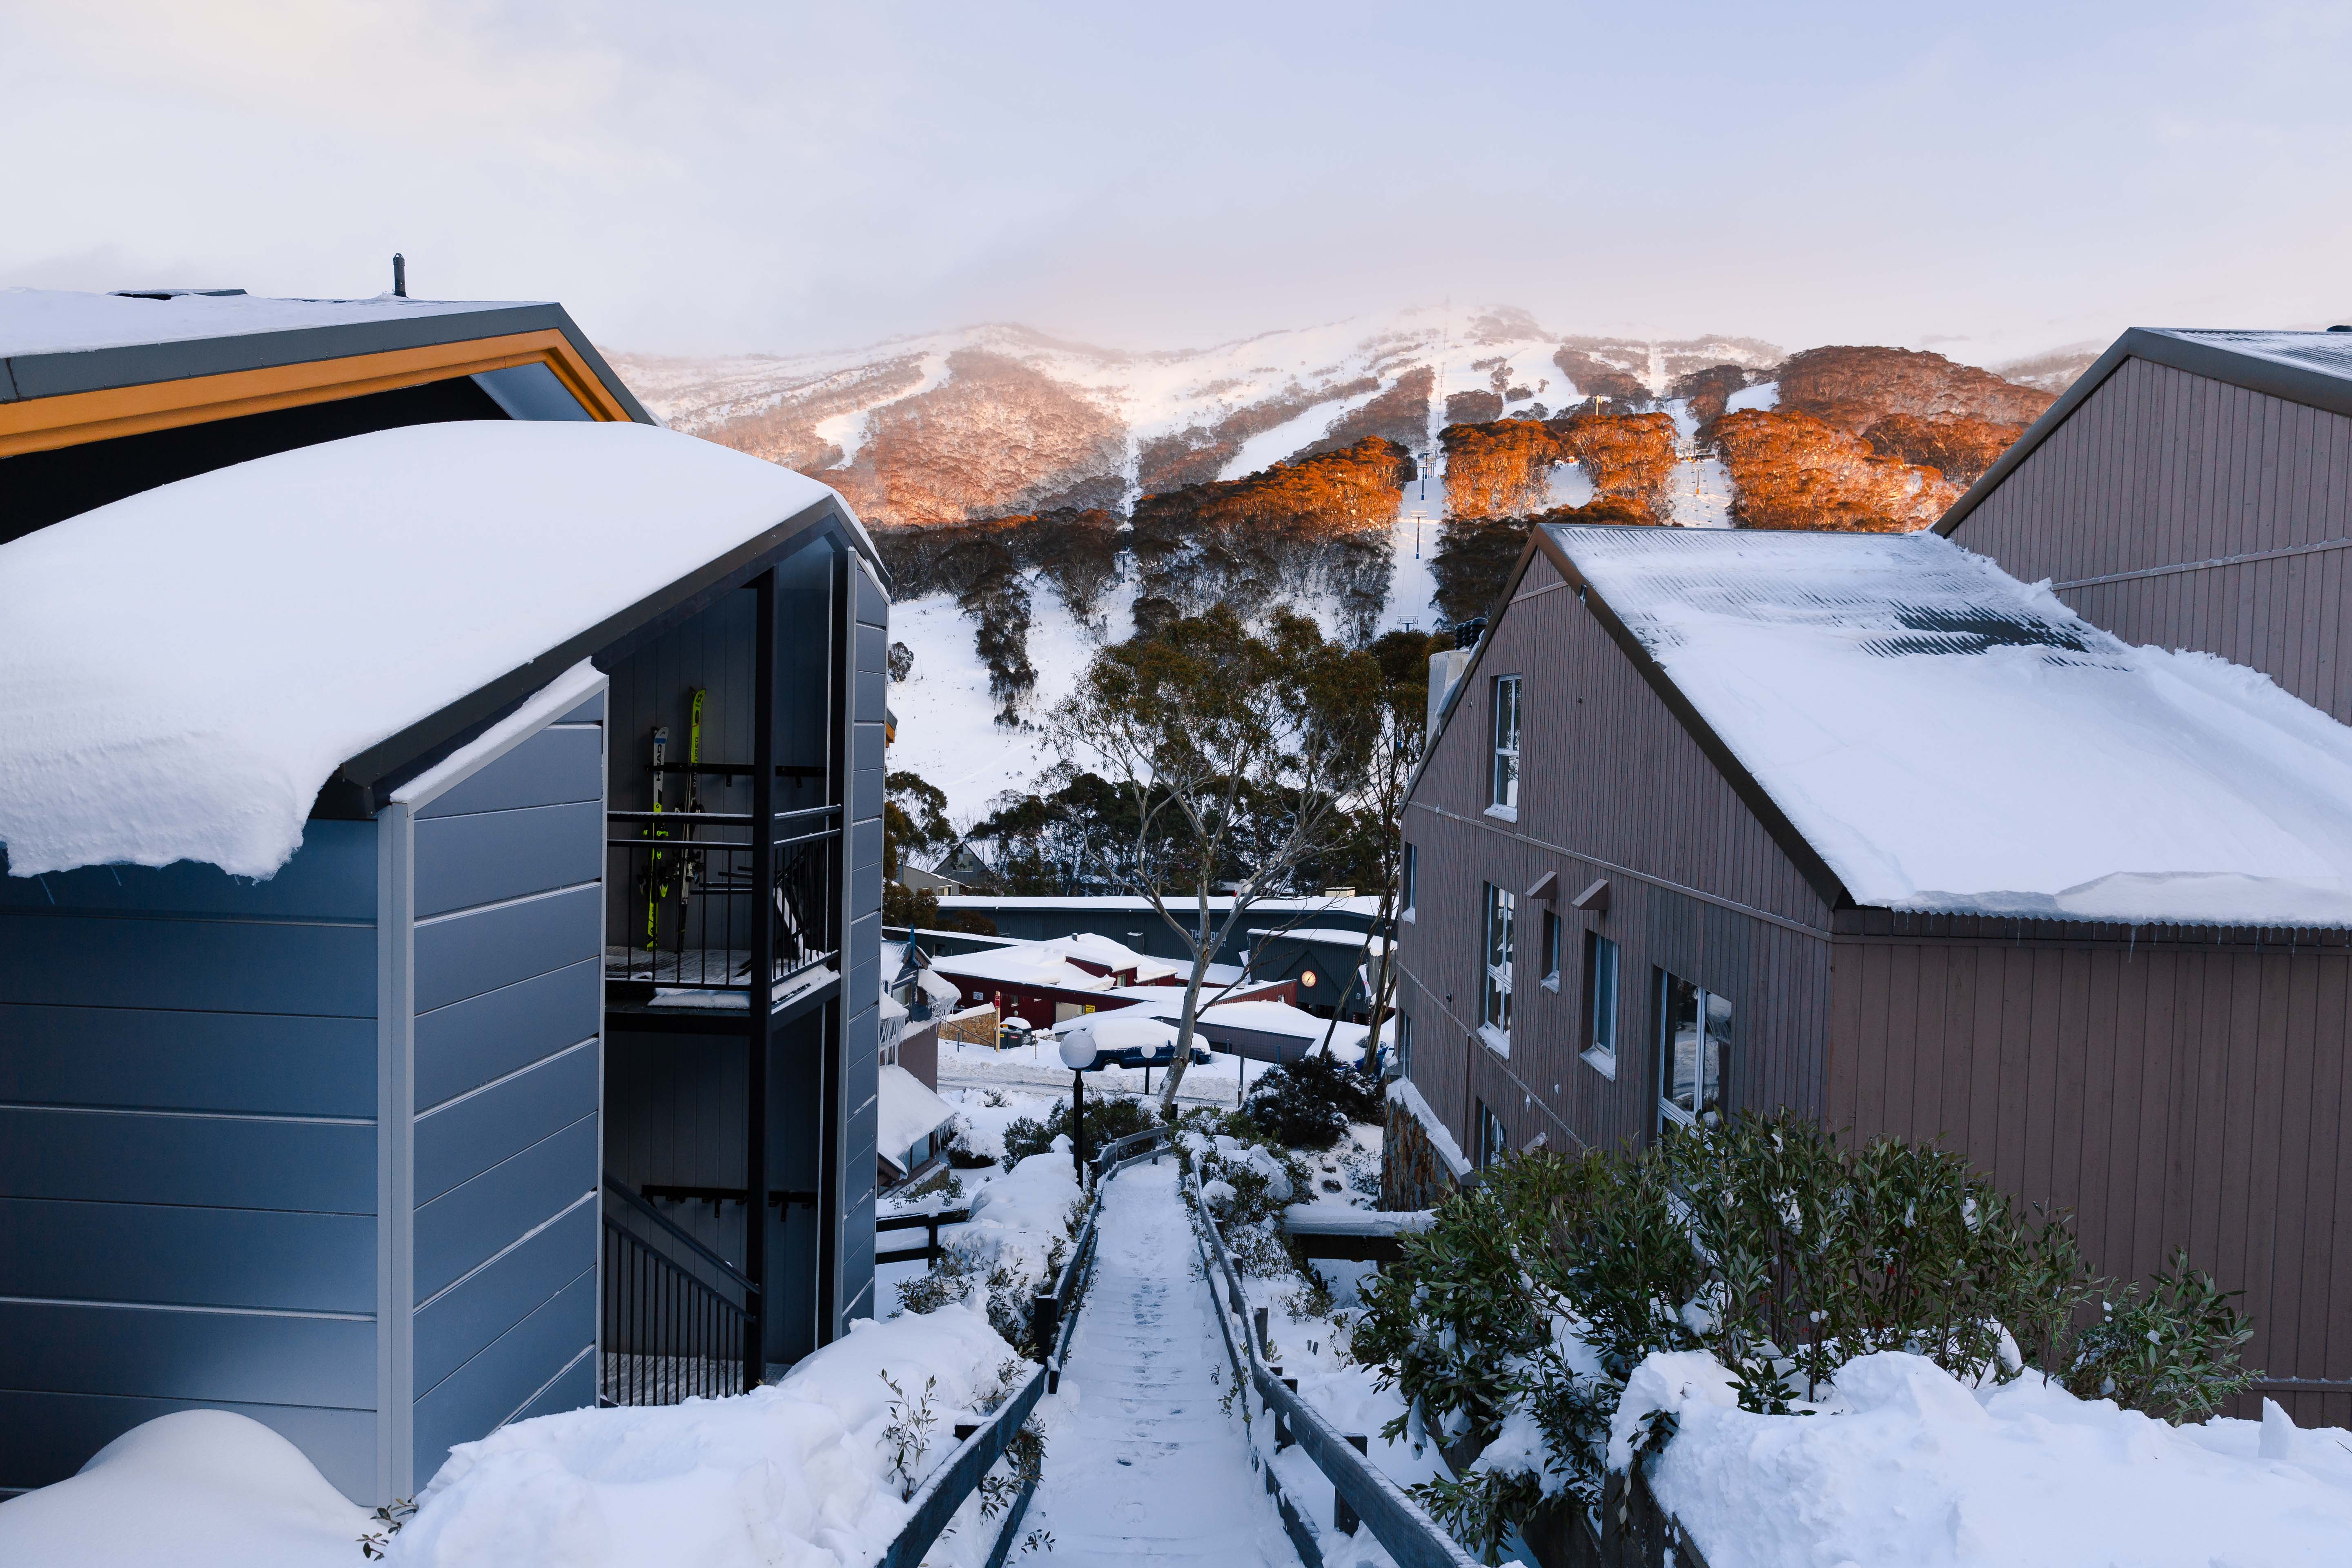 68-year-old man dies skiing with friends on Thredbo's slopes